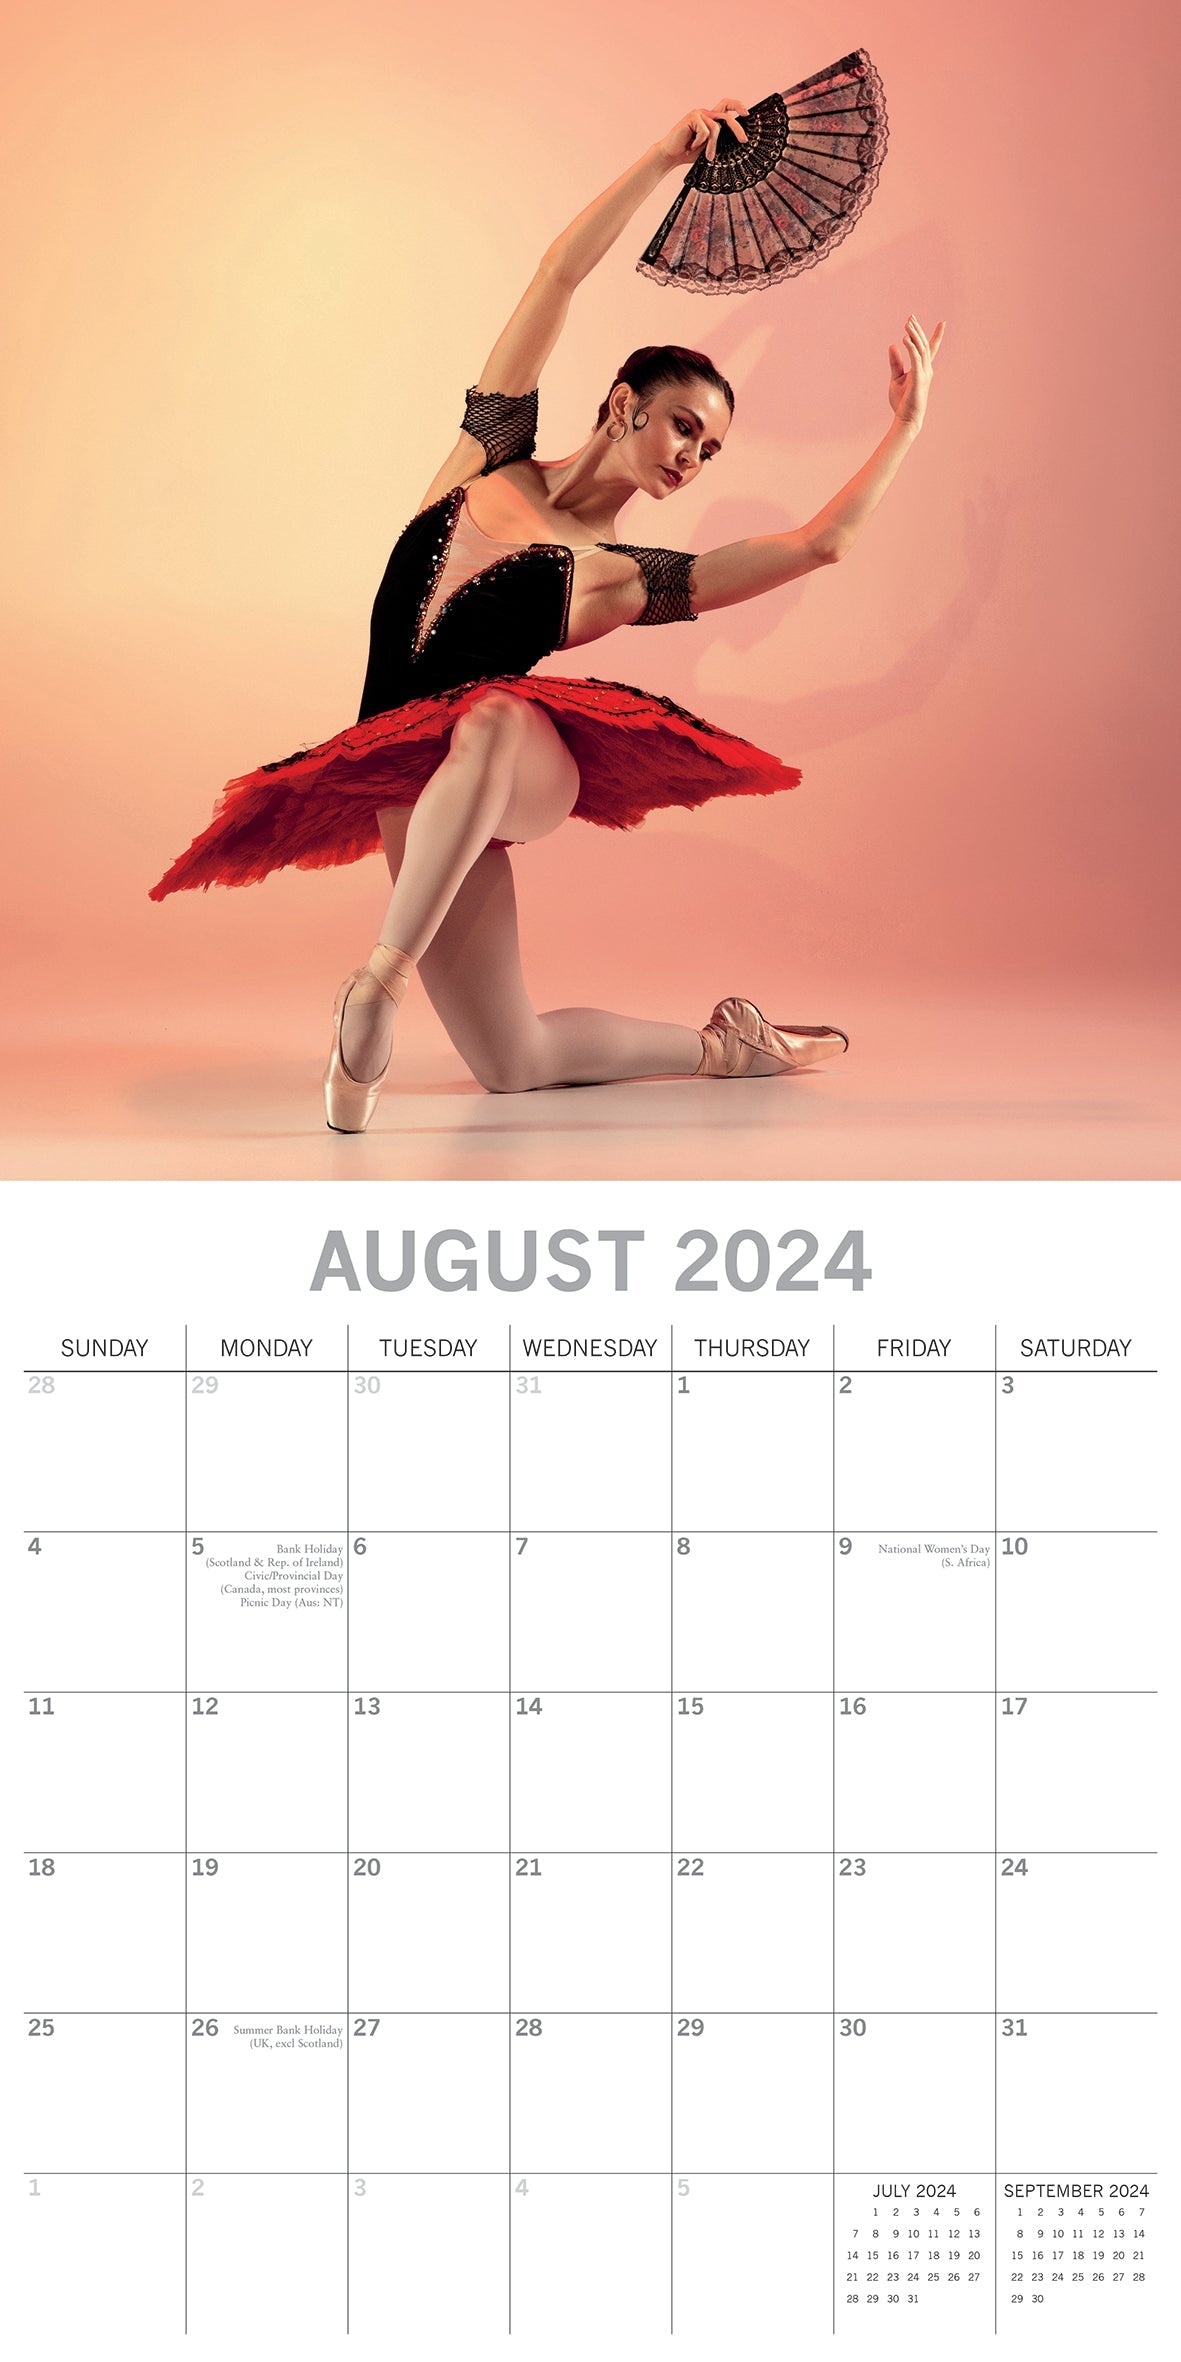 2024 Ballet Square Wall Calendar Sports Calendars by The Gifted